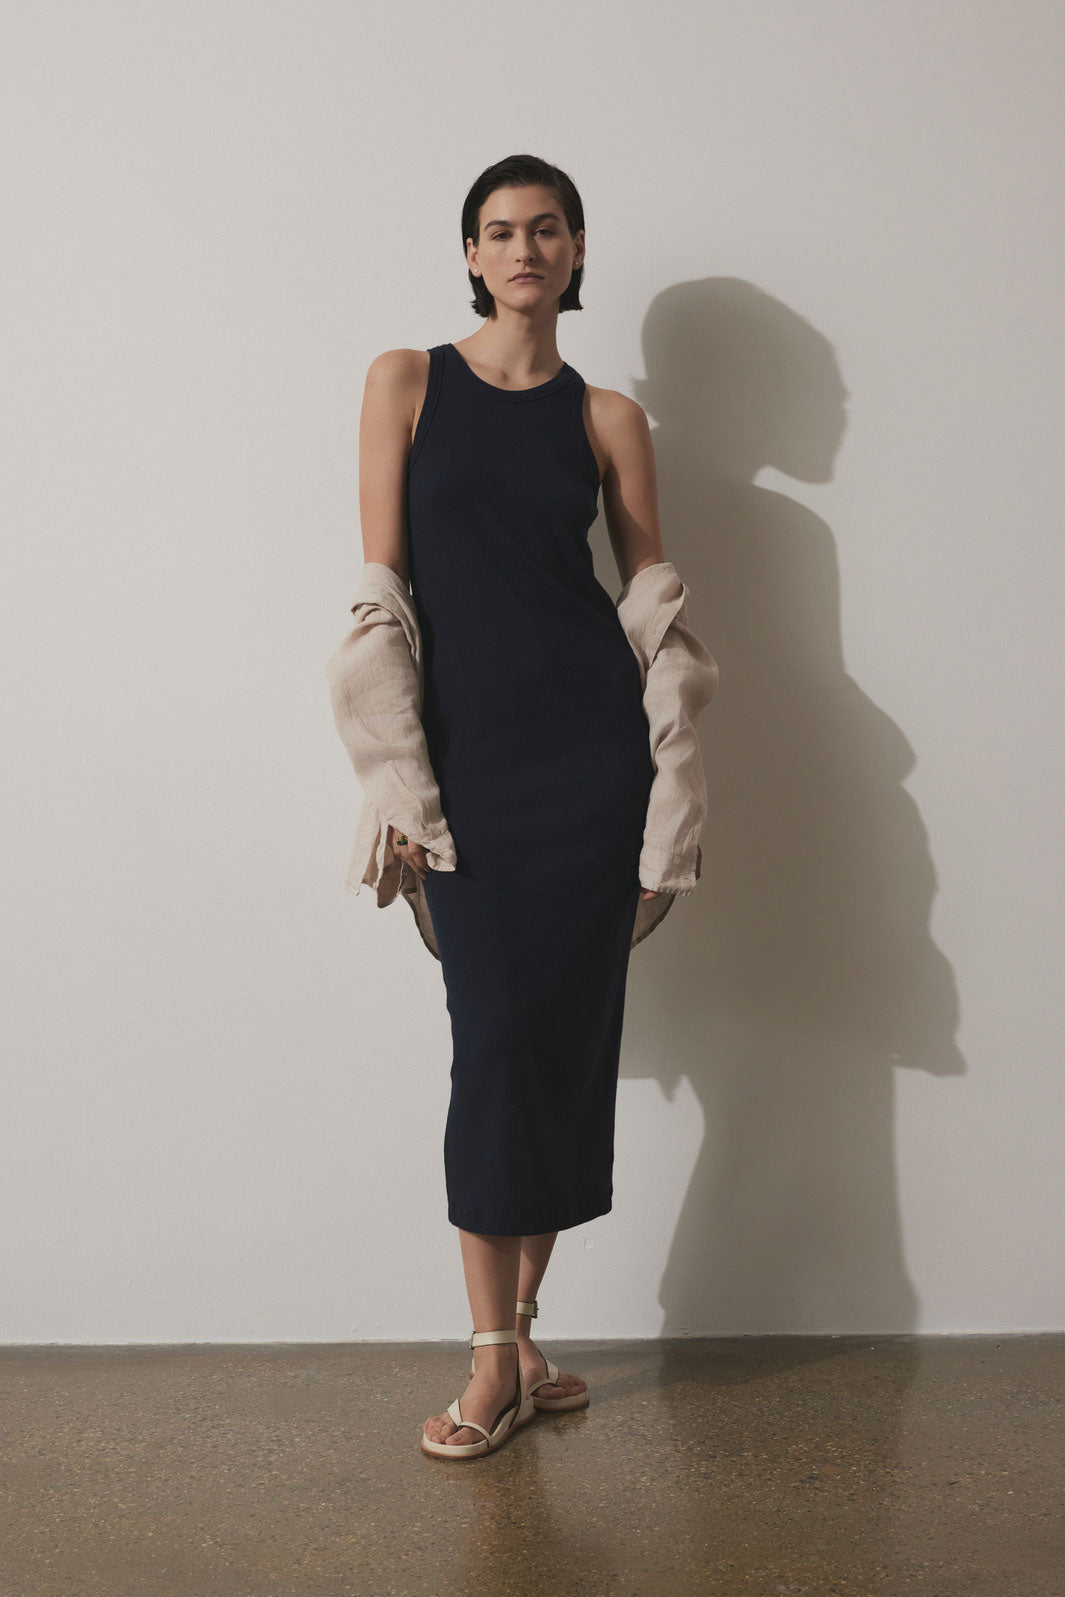 A woman in a GRIFFITH DRESS by Velvet by Jenny Graham with a crew neckline stands holding a cream jacket, with her shadow visible on the wall behind her. She wears beige sandals.-36863292408001